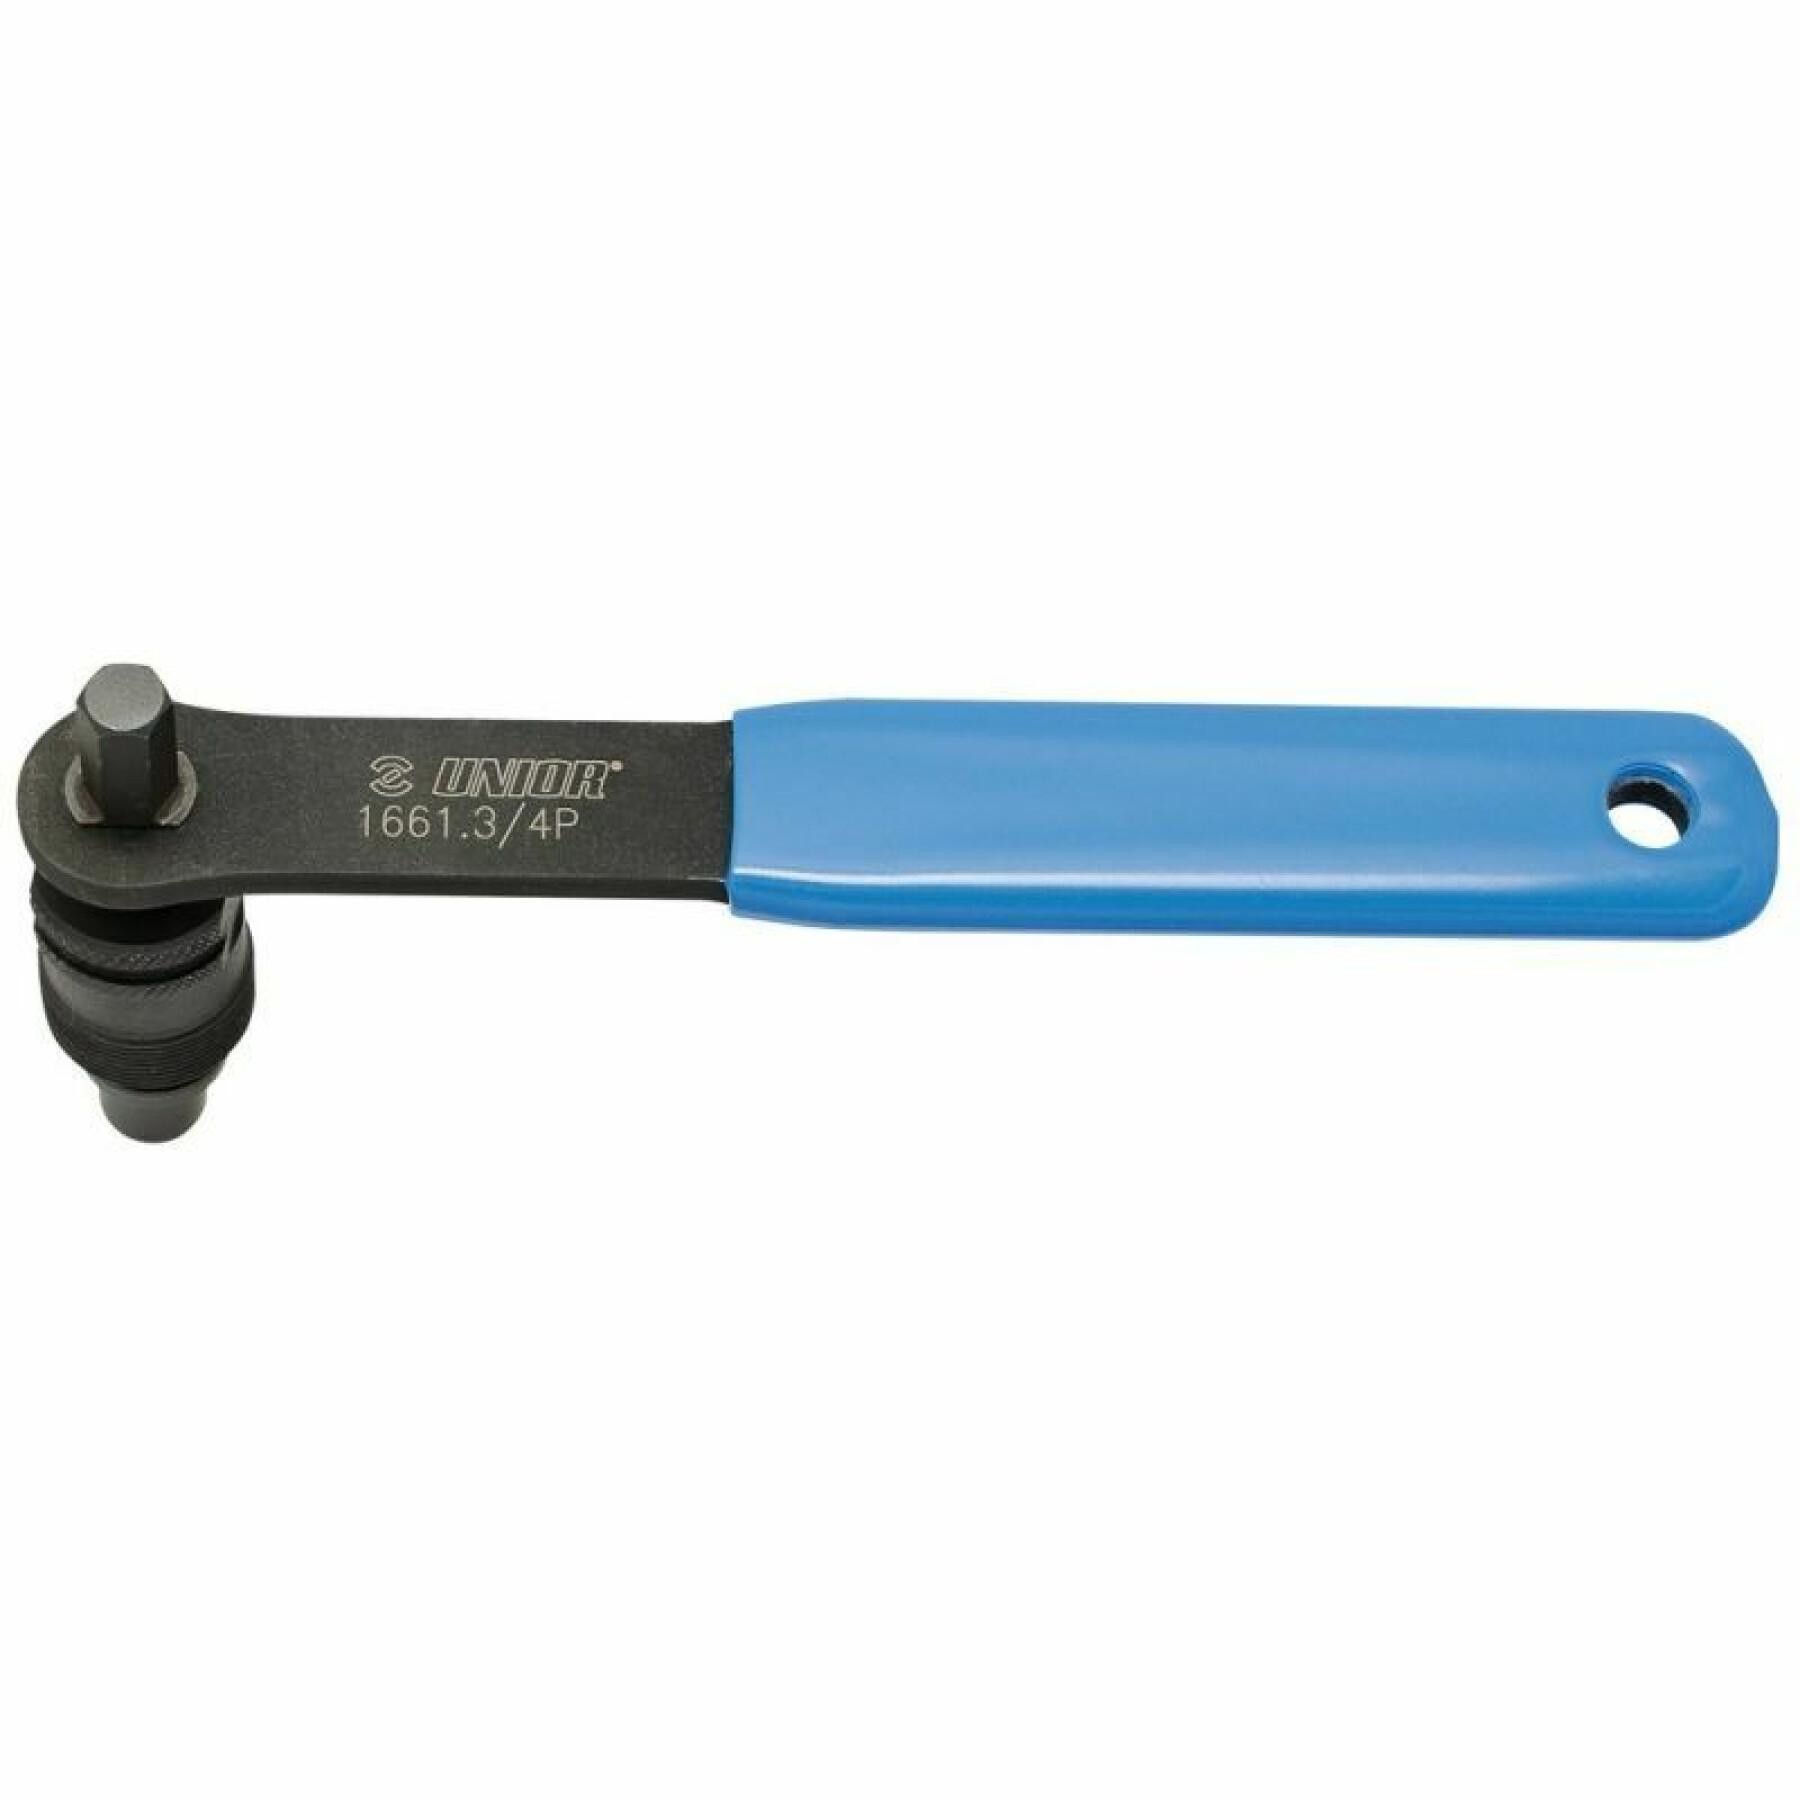 Bottom bracket puller a/handle for shimano Unior octaling/isis